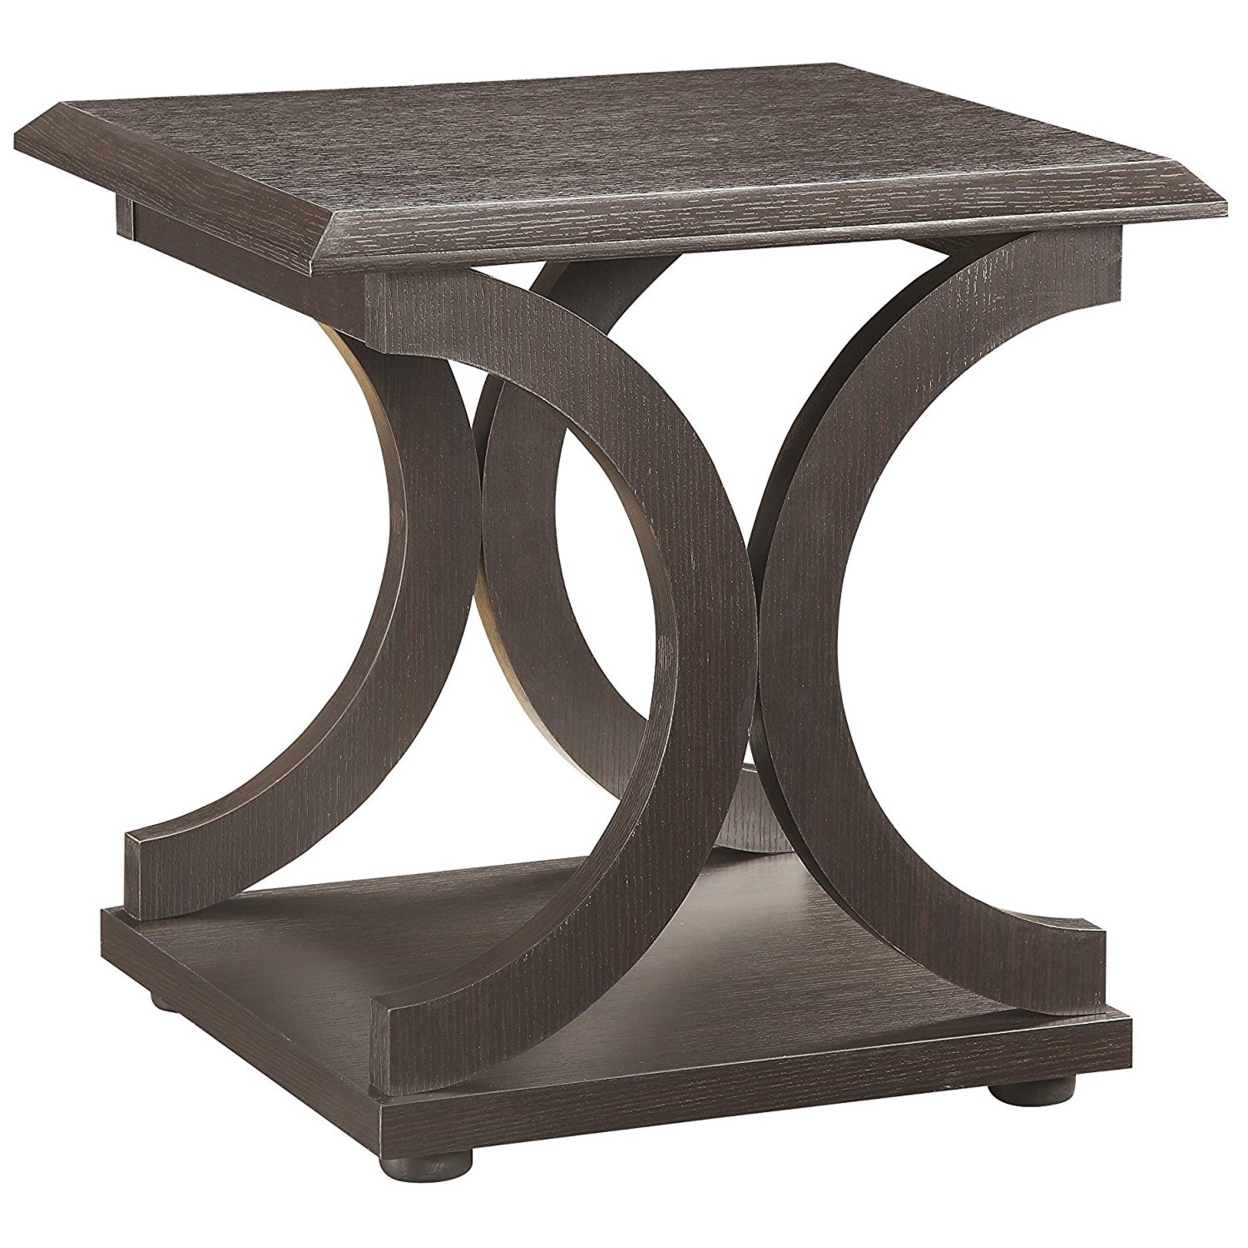 Contemporary Style C Shaped End Table With Open Shelf & Tabletop, Espresso Brown- Saltoro Sherpi